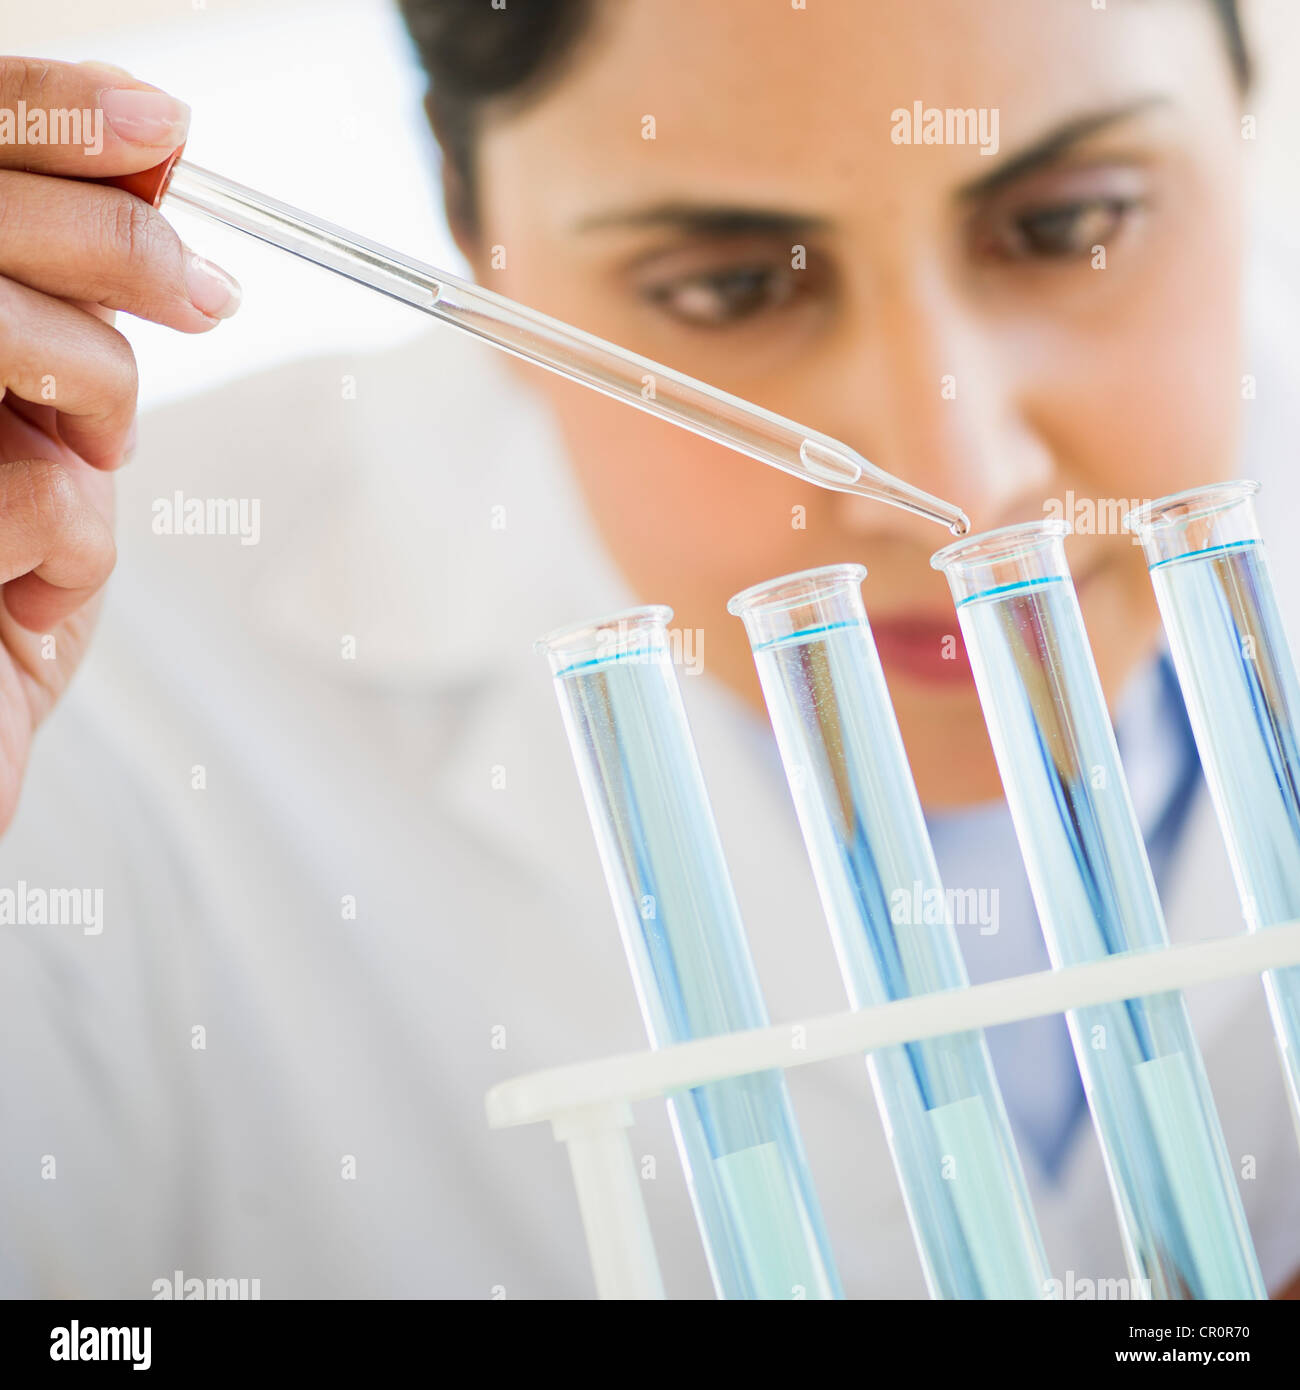 USA, New Jersey, Jersey City, Scientist pipetting liquid into test tubes Stock Photo